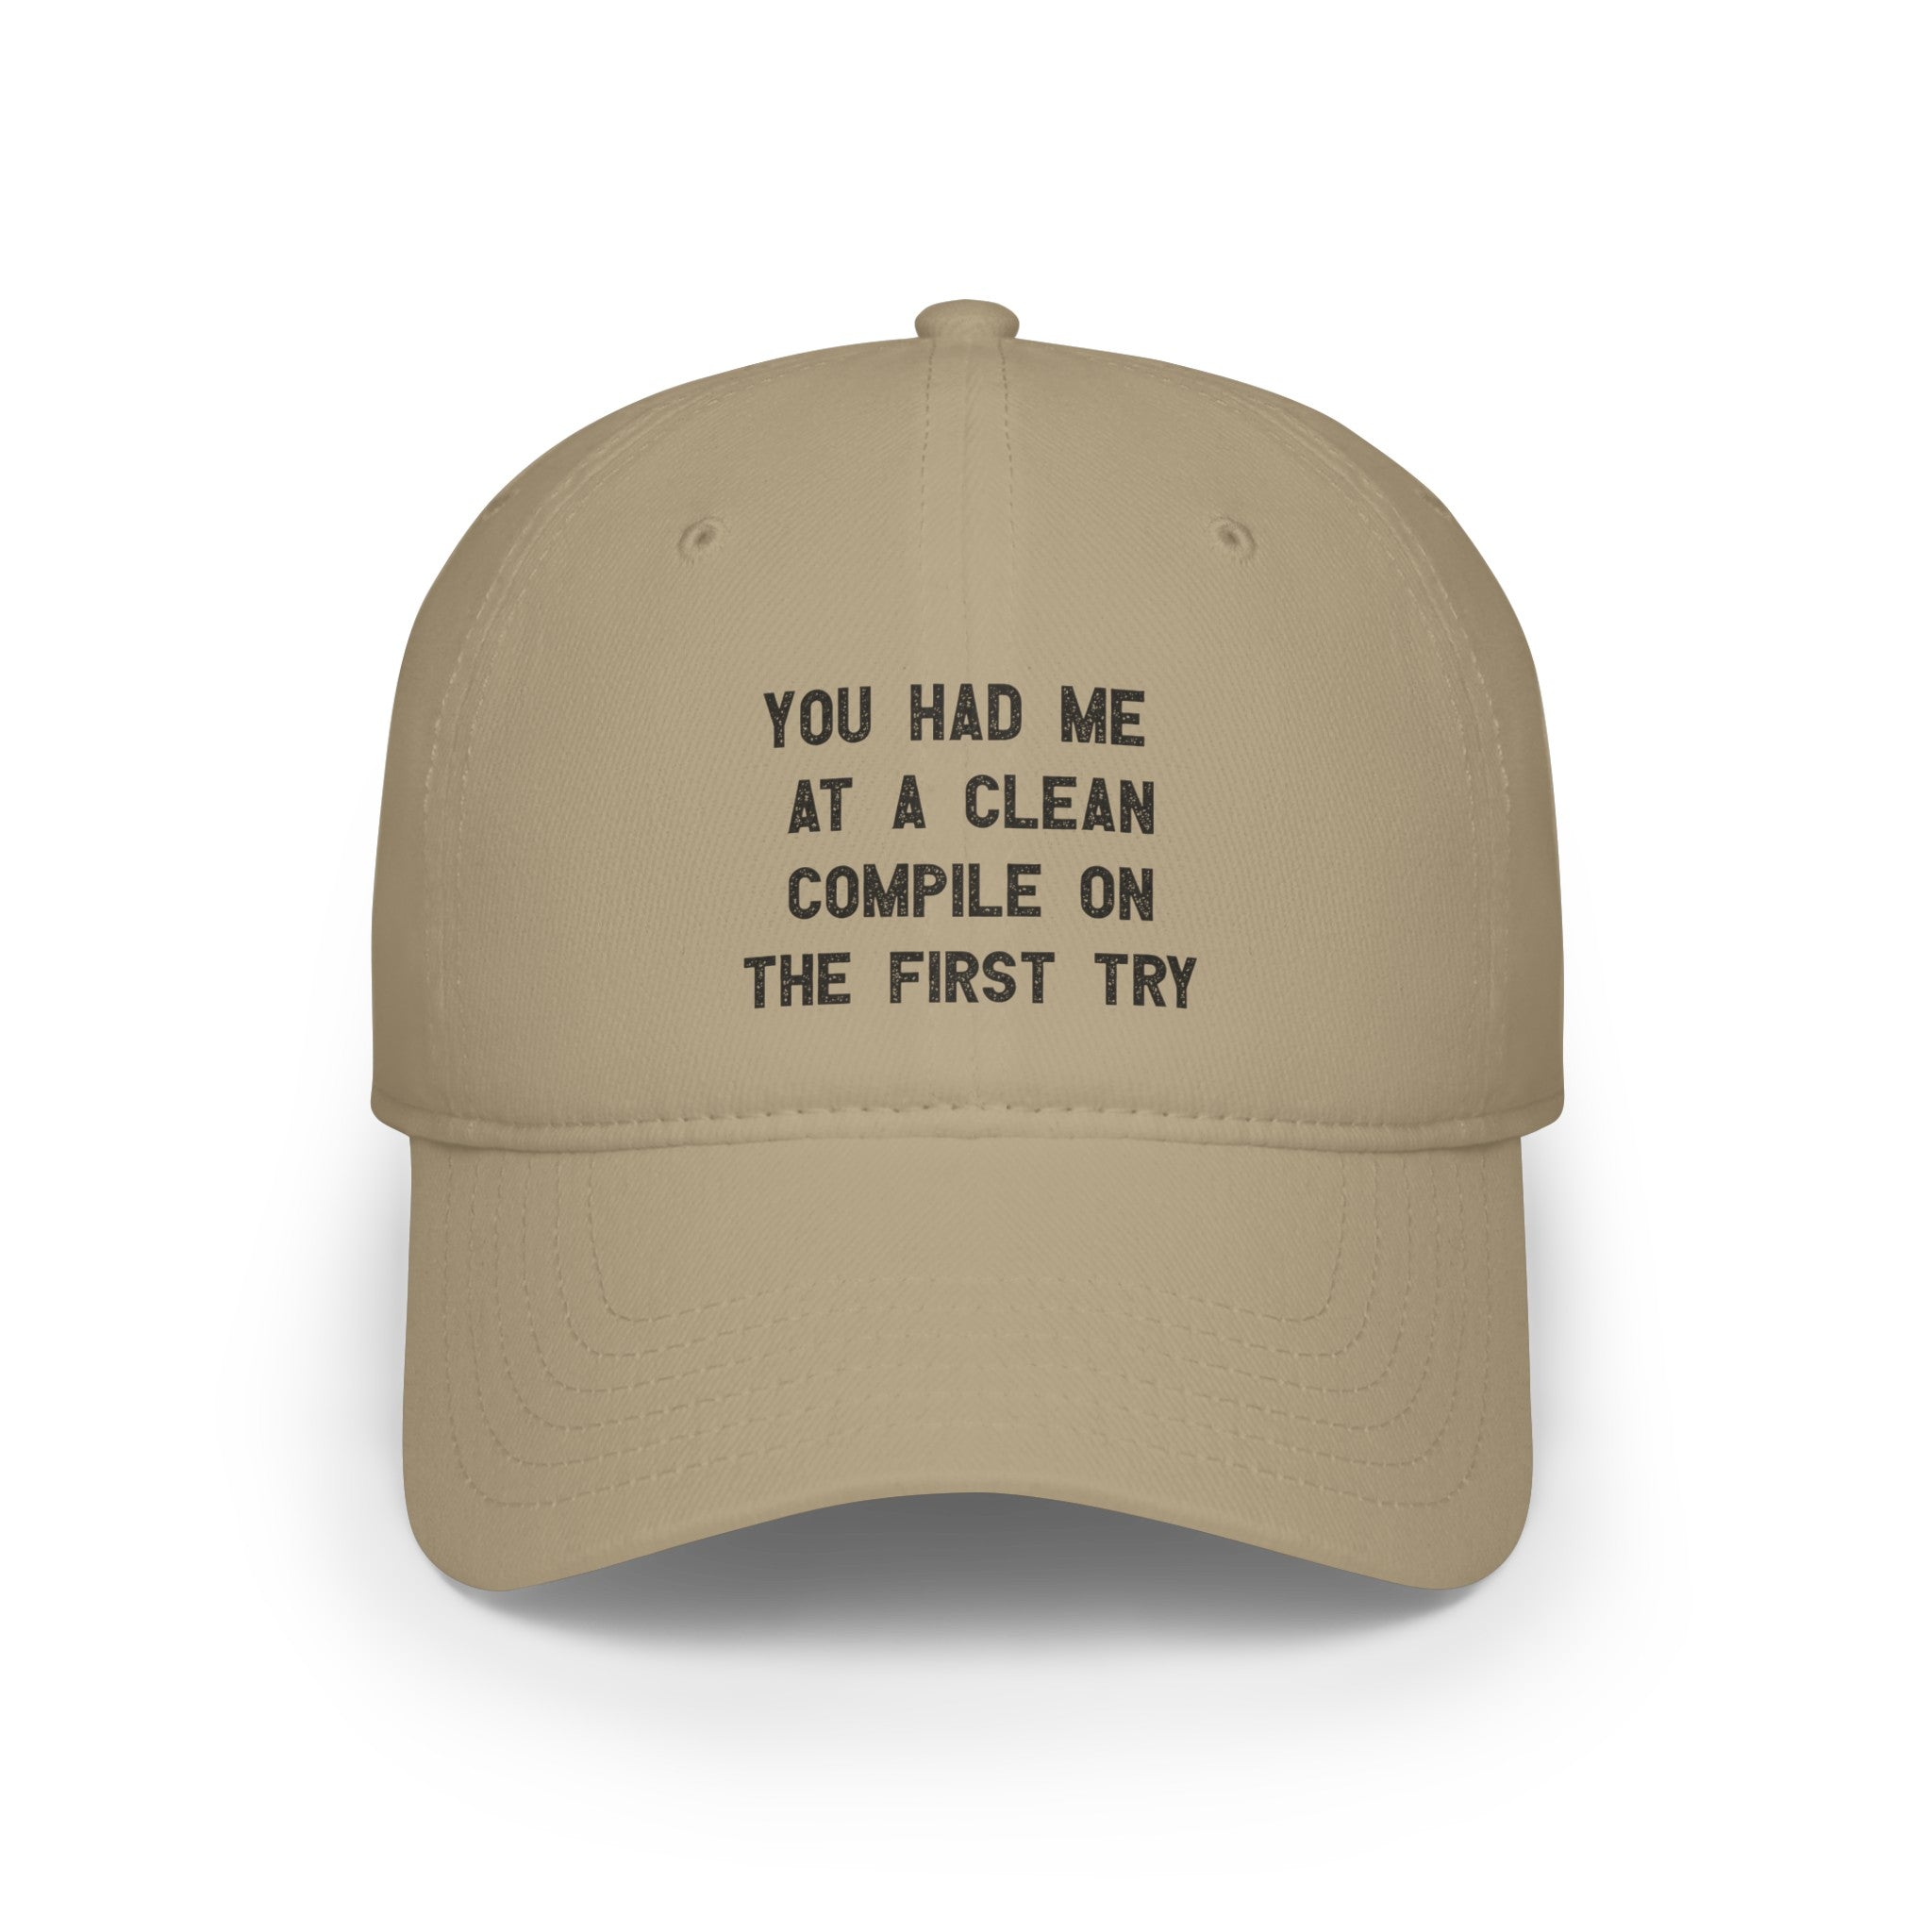 A You Had Me At a Clean Compile on the First Try - Hat with reinforced stitching features the phrase "YOU HAD ME AT A CLEAN COMPILE ON THE FIRST TRY" printed in black text on the front, making it perfect for those fluent in coder lingo.